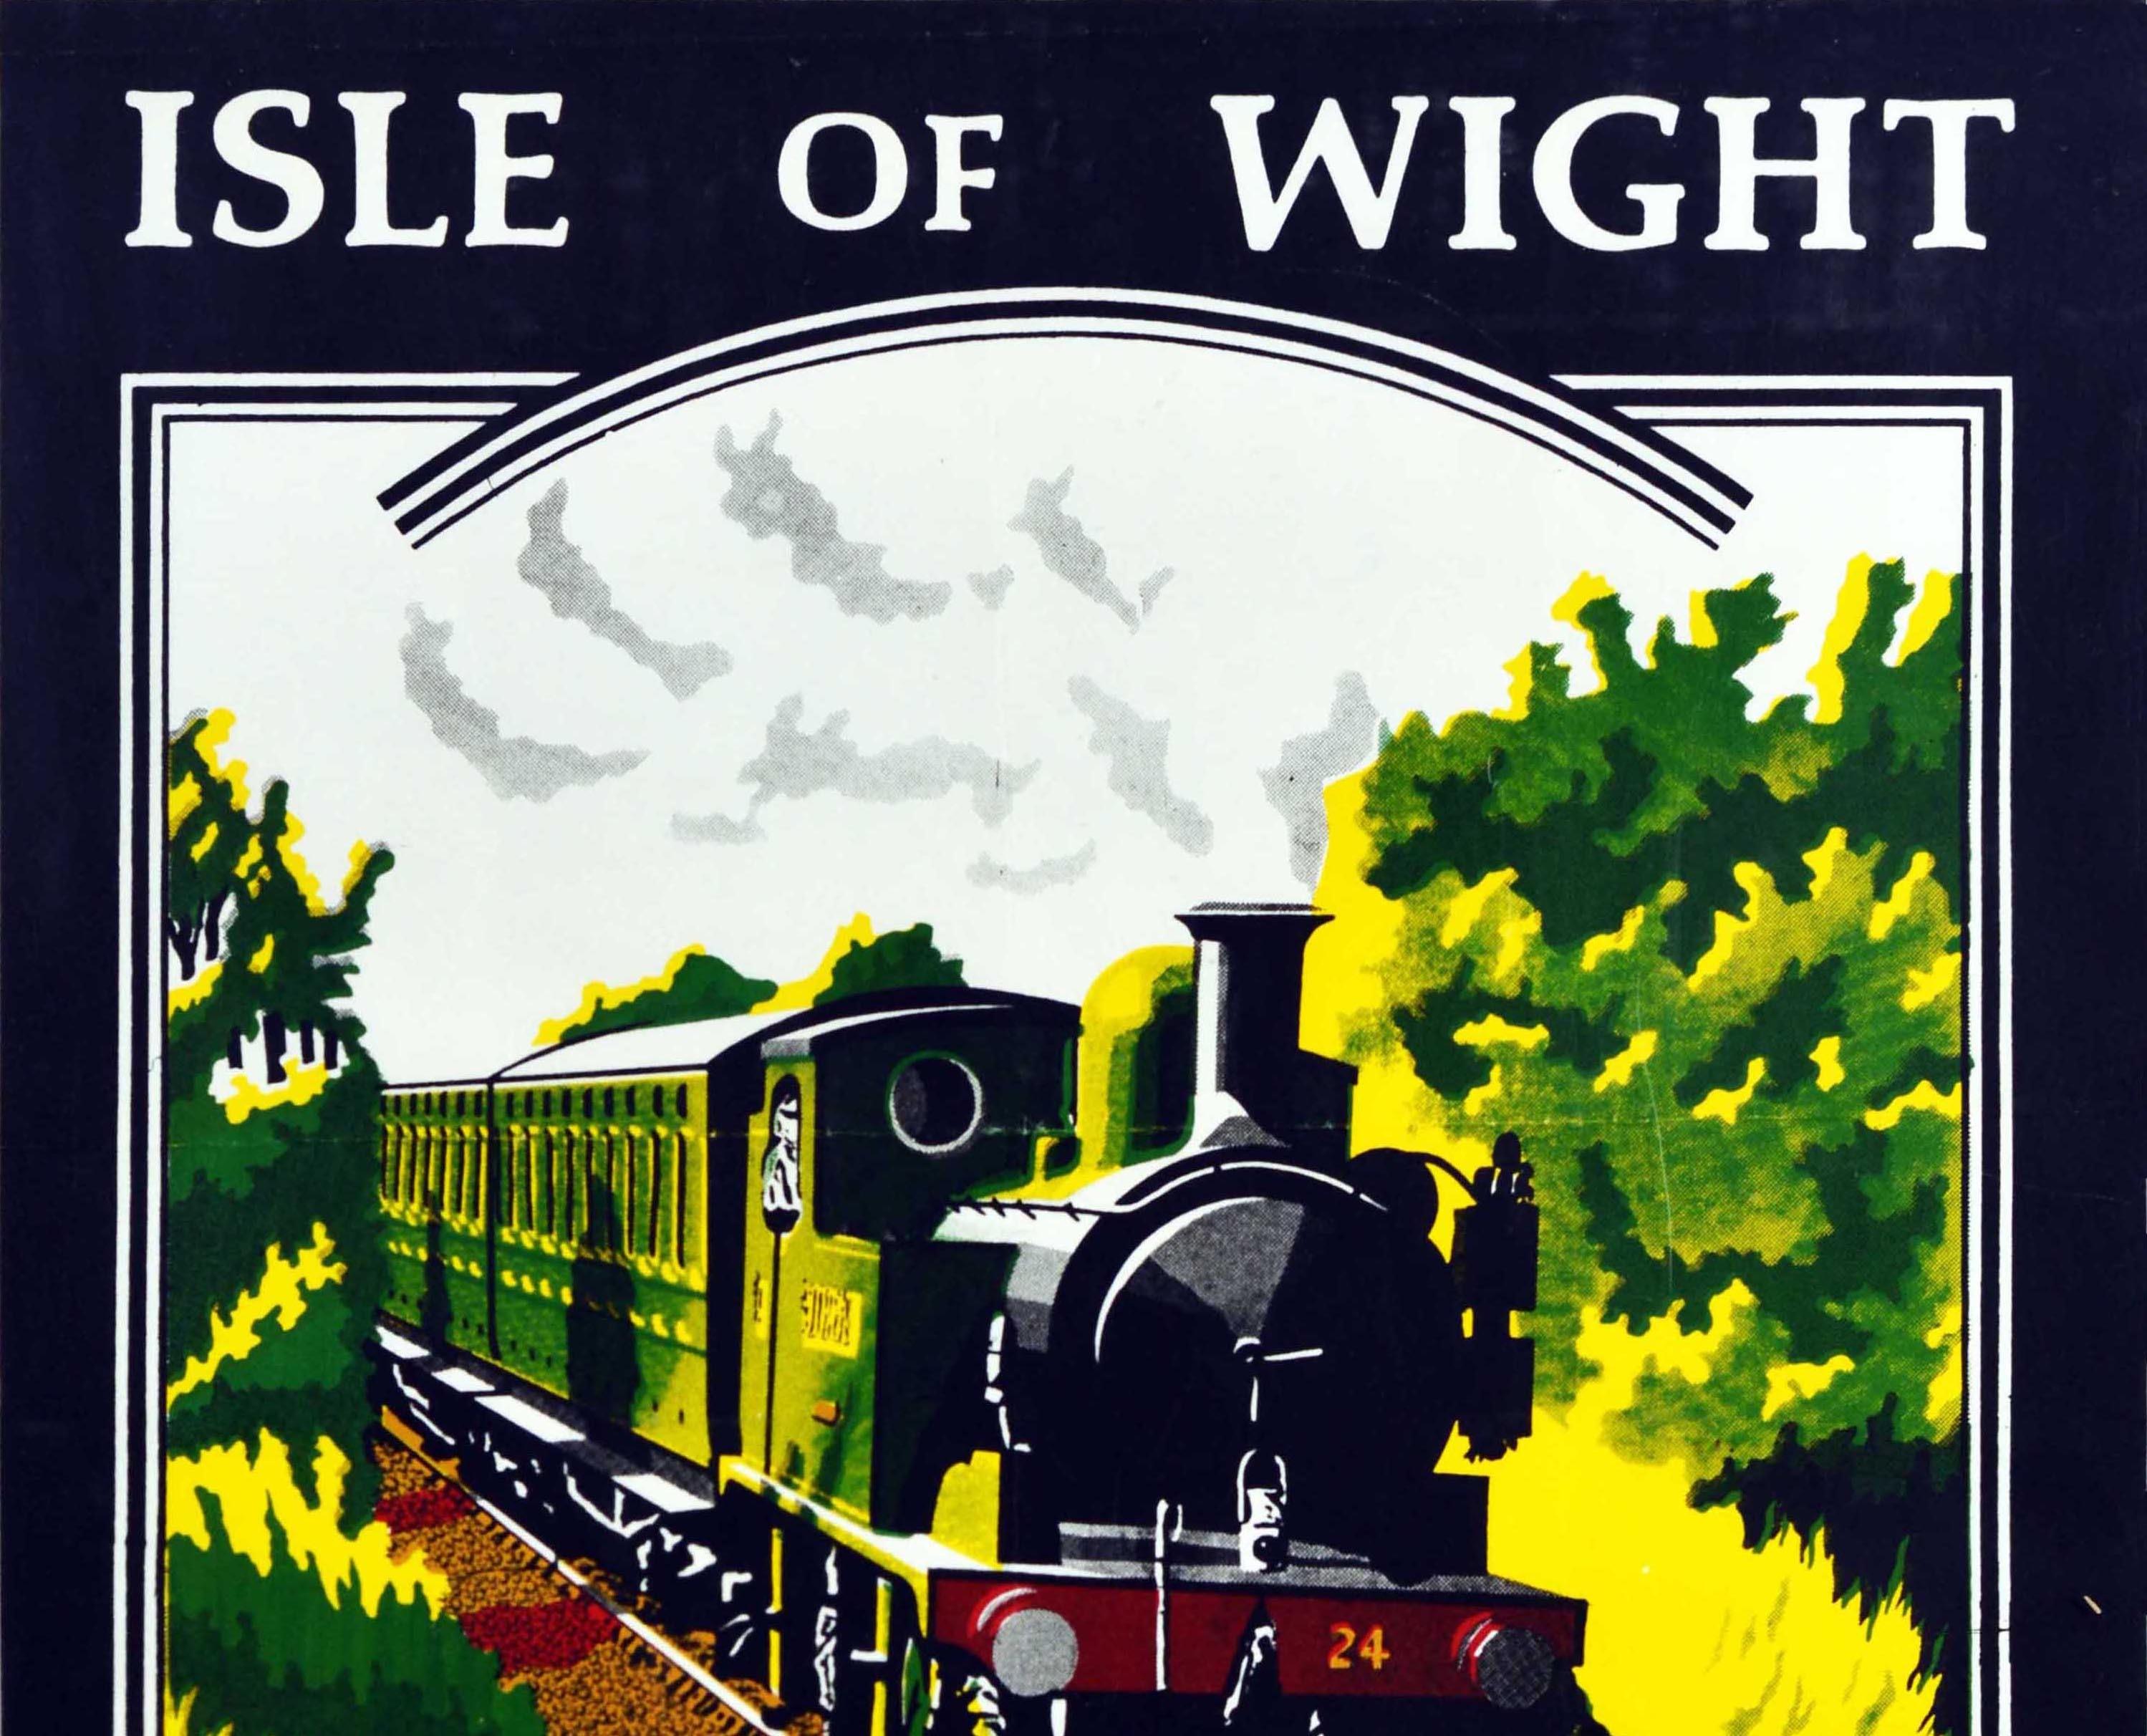 Original Vintage Travel Poster Isle Of Wight Steam Railway Train Summer Holidays - Print by Chris Whiting